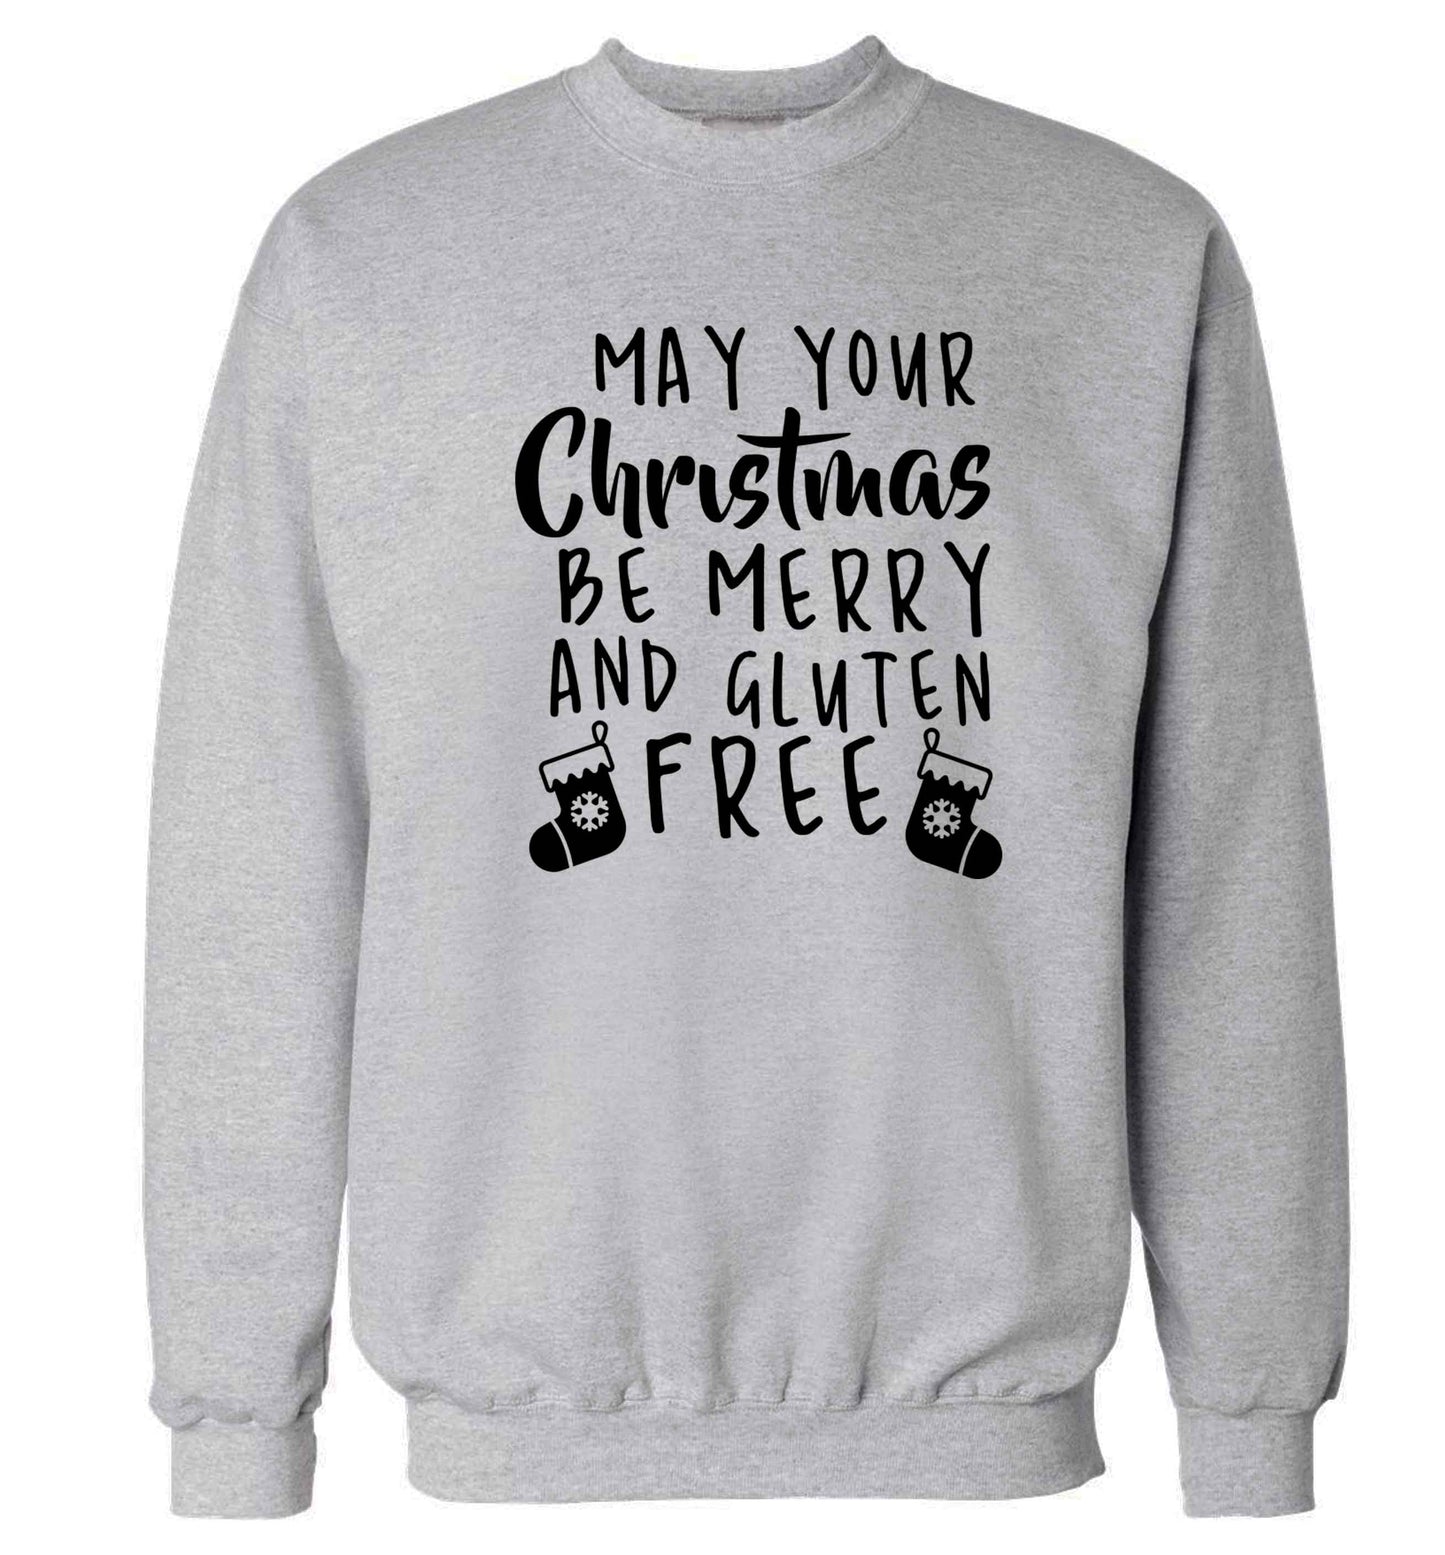 May your Christmas be merry and gluten free Adult's unisex grey Sweater 2XL